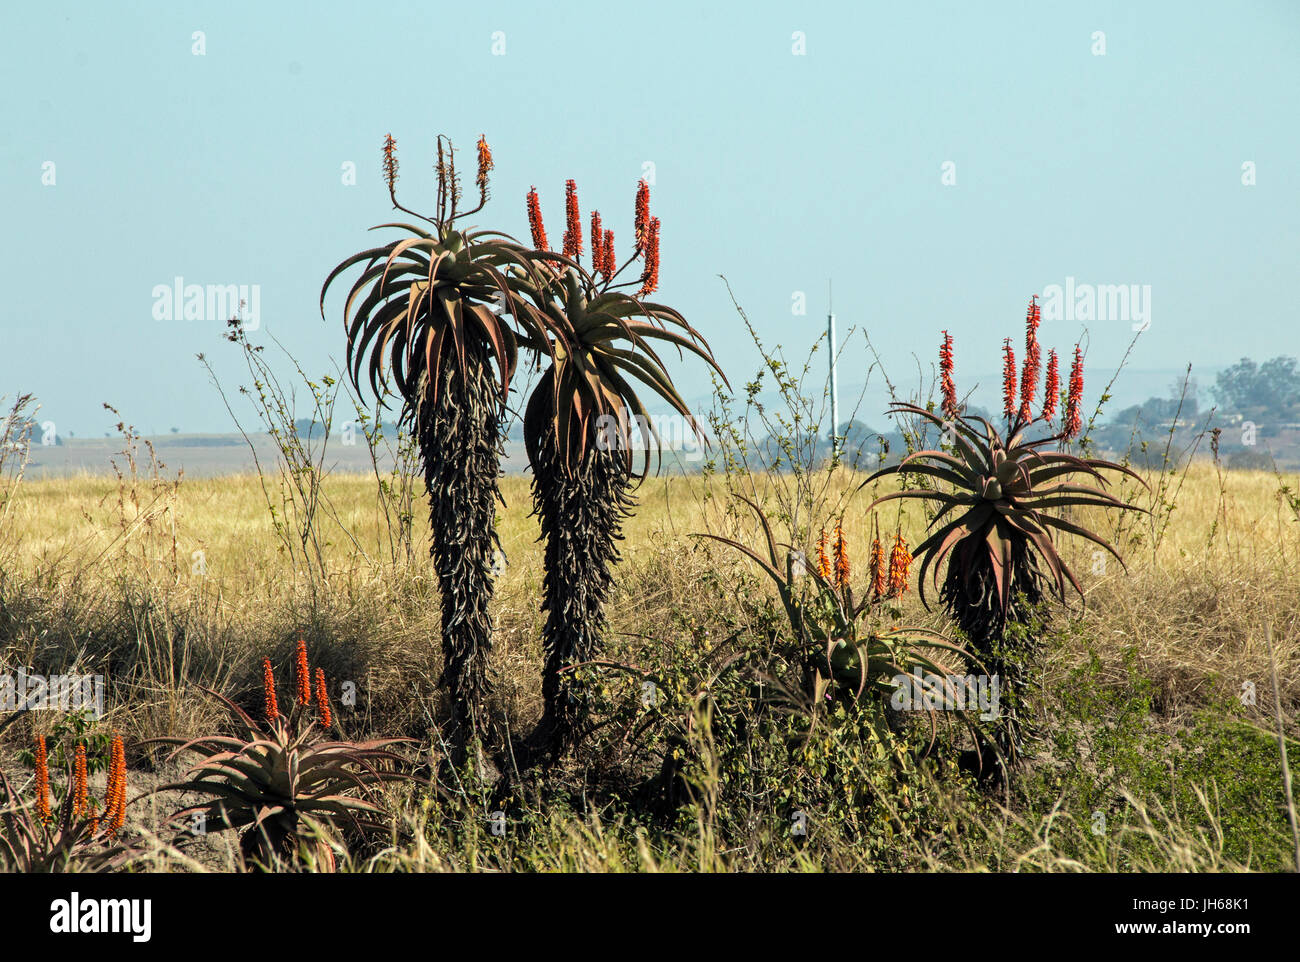 Flowering aloe plants in dry winter landscape against blue sky in South Africa Stock Photo